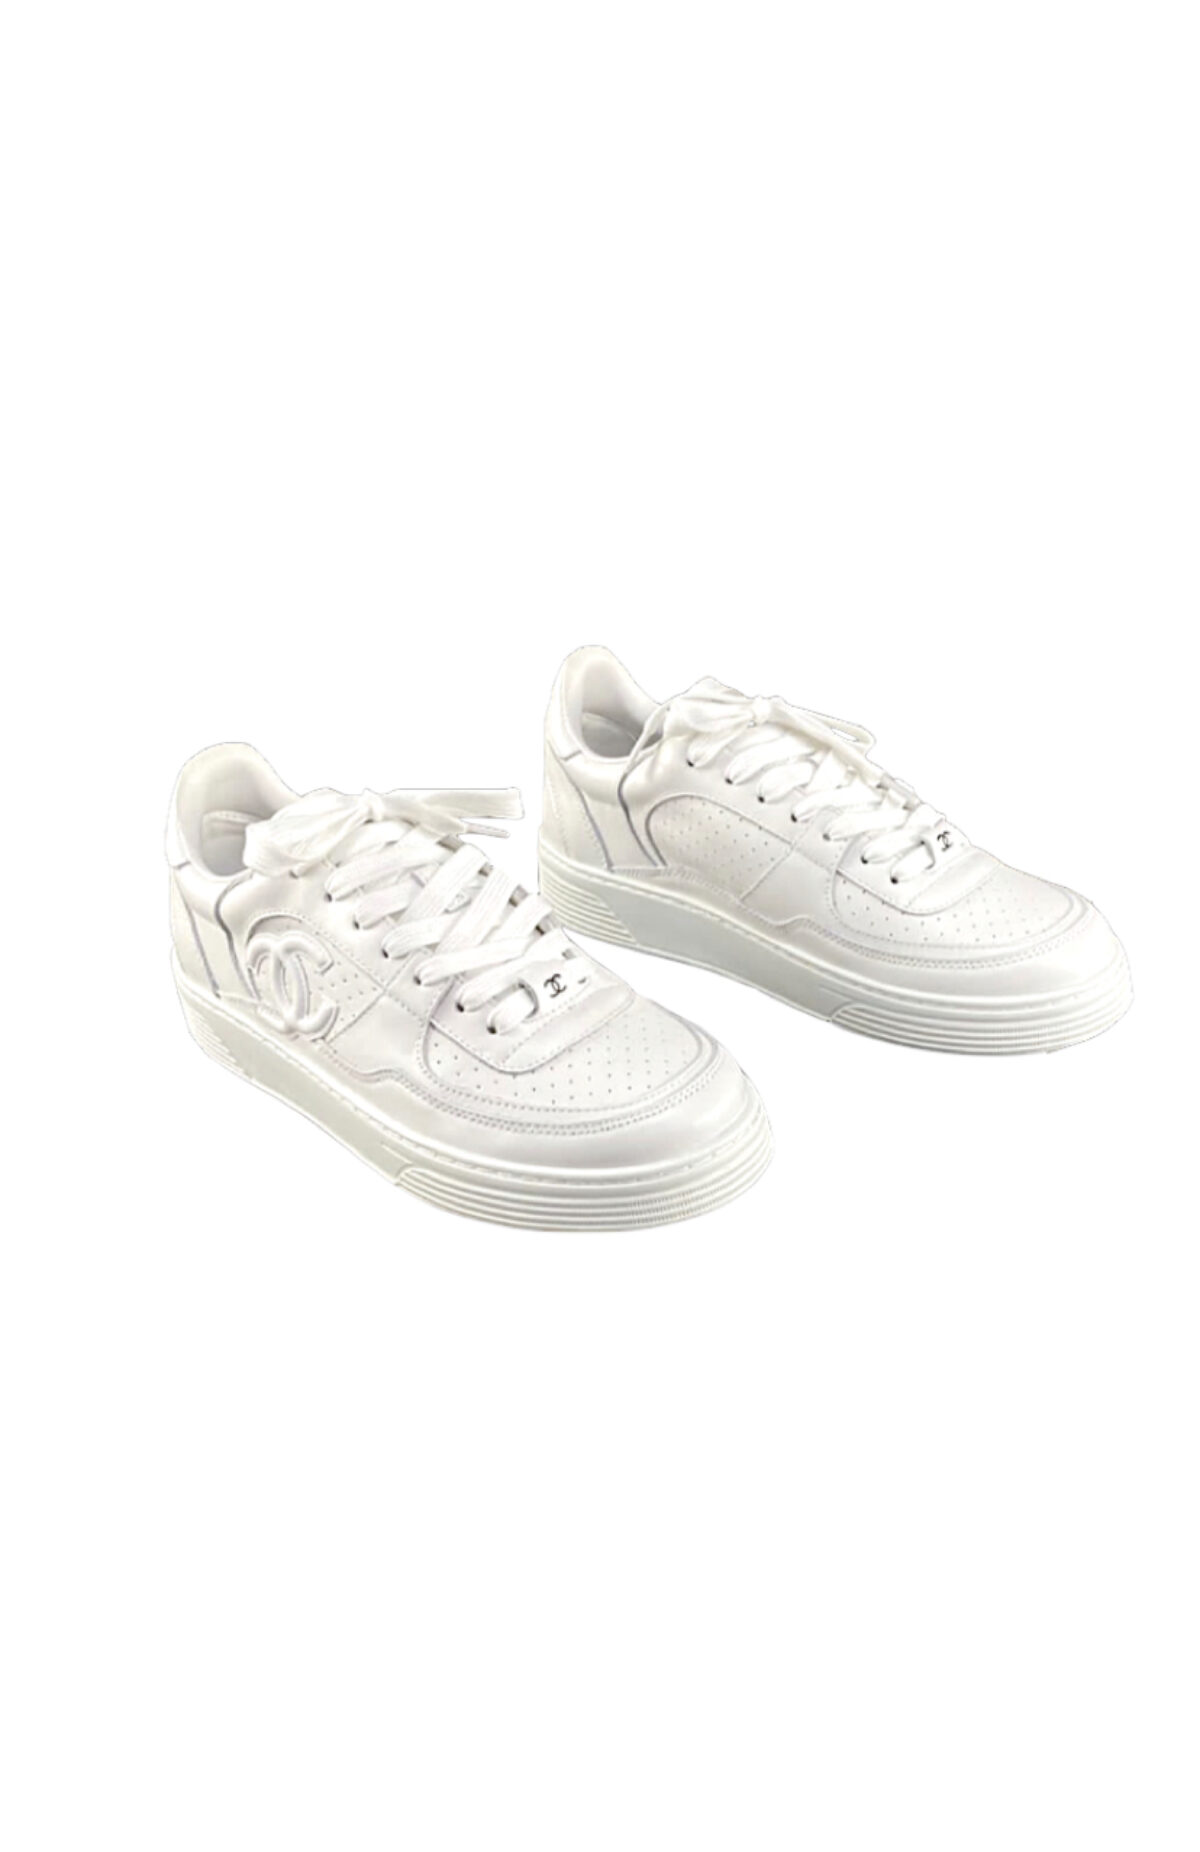 white high top chanel sneakers 38